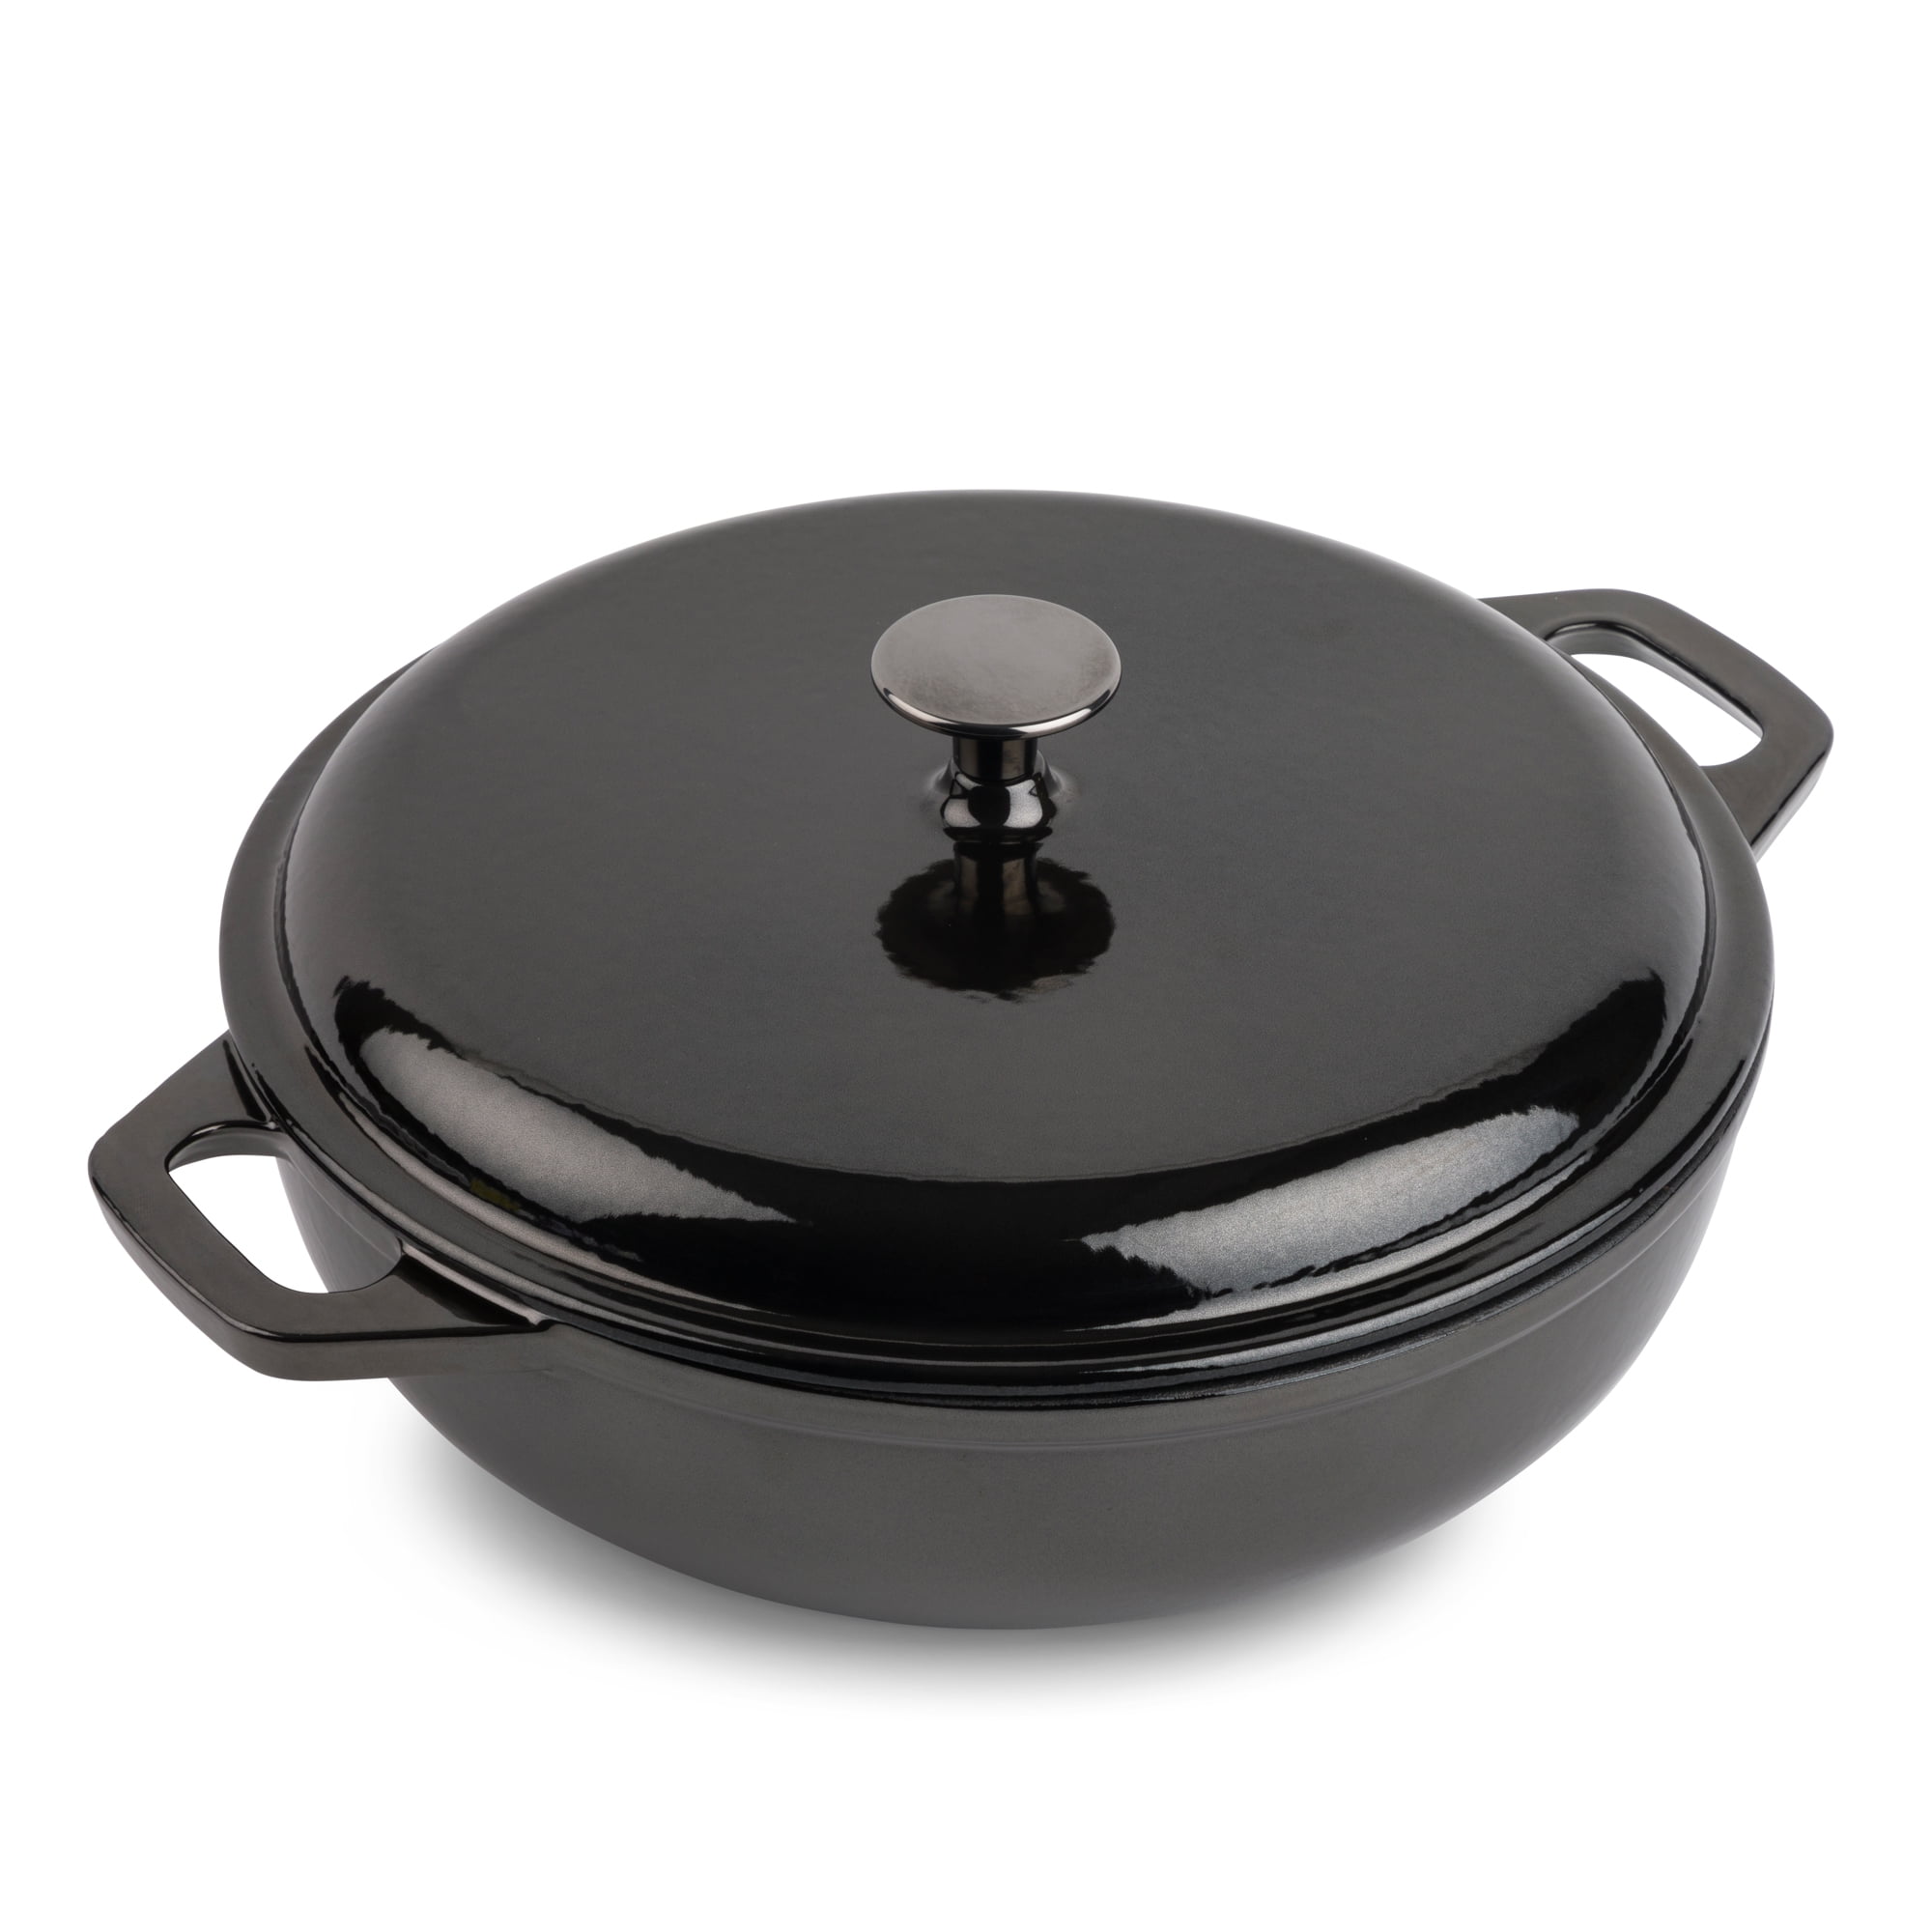 Staub Cast Iron Braiser - A Look and Impressions, Comparison with